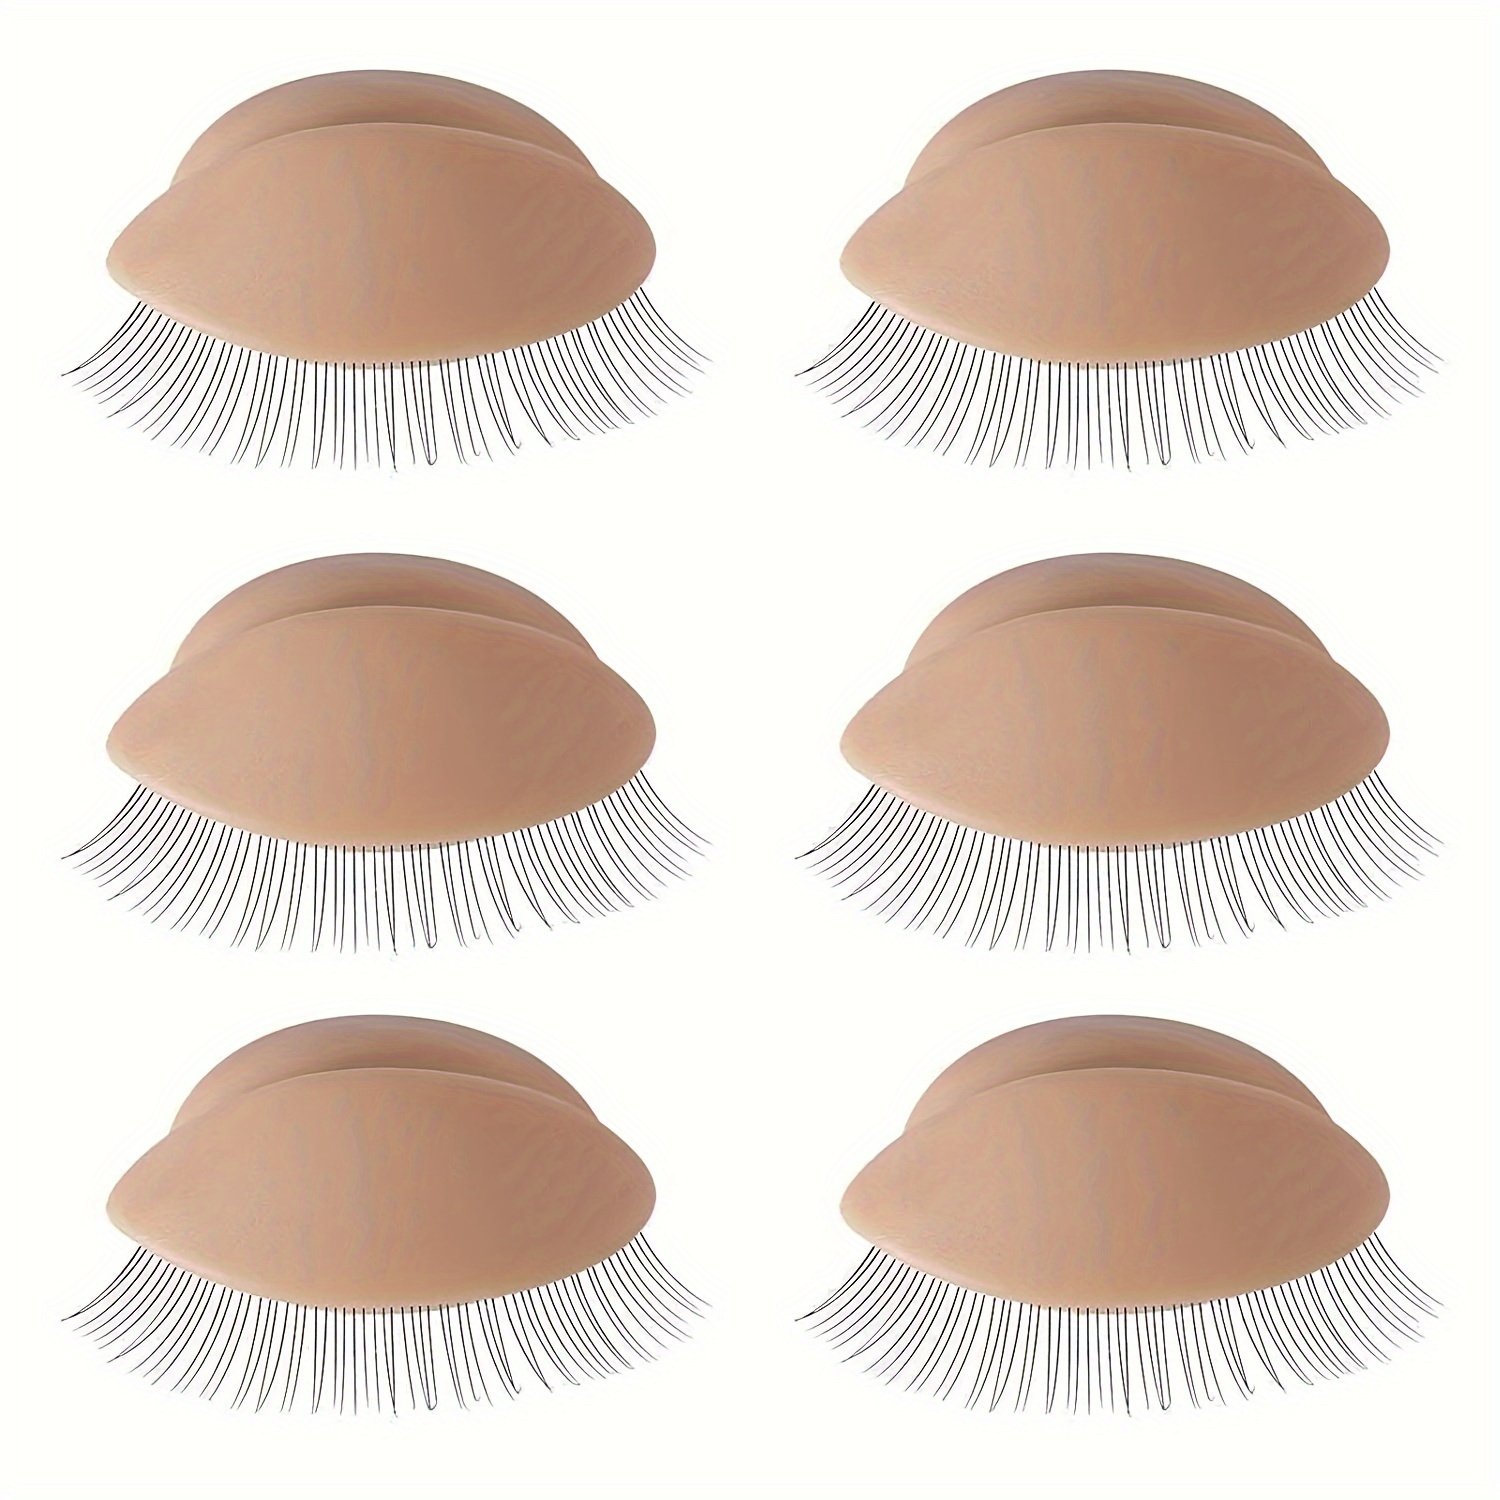 

3 Pairs Replacement Eyelids For Mannequin Head, Silicone Realistic Removable Eyelids With Lash, Mannequin Head Eyelids For Lash Extension Training Practice Replaced Eyeballs